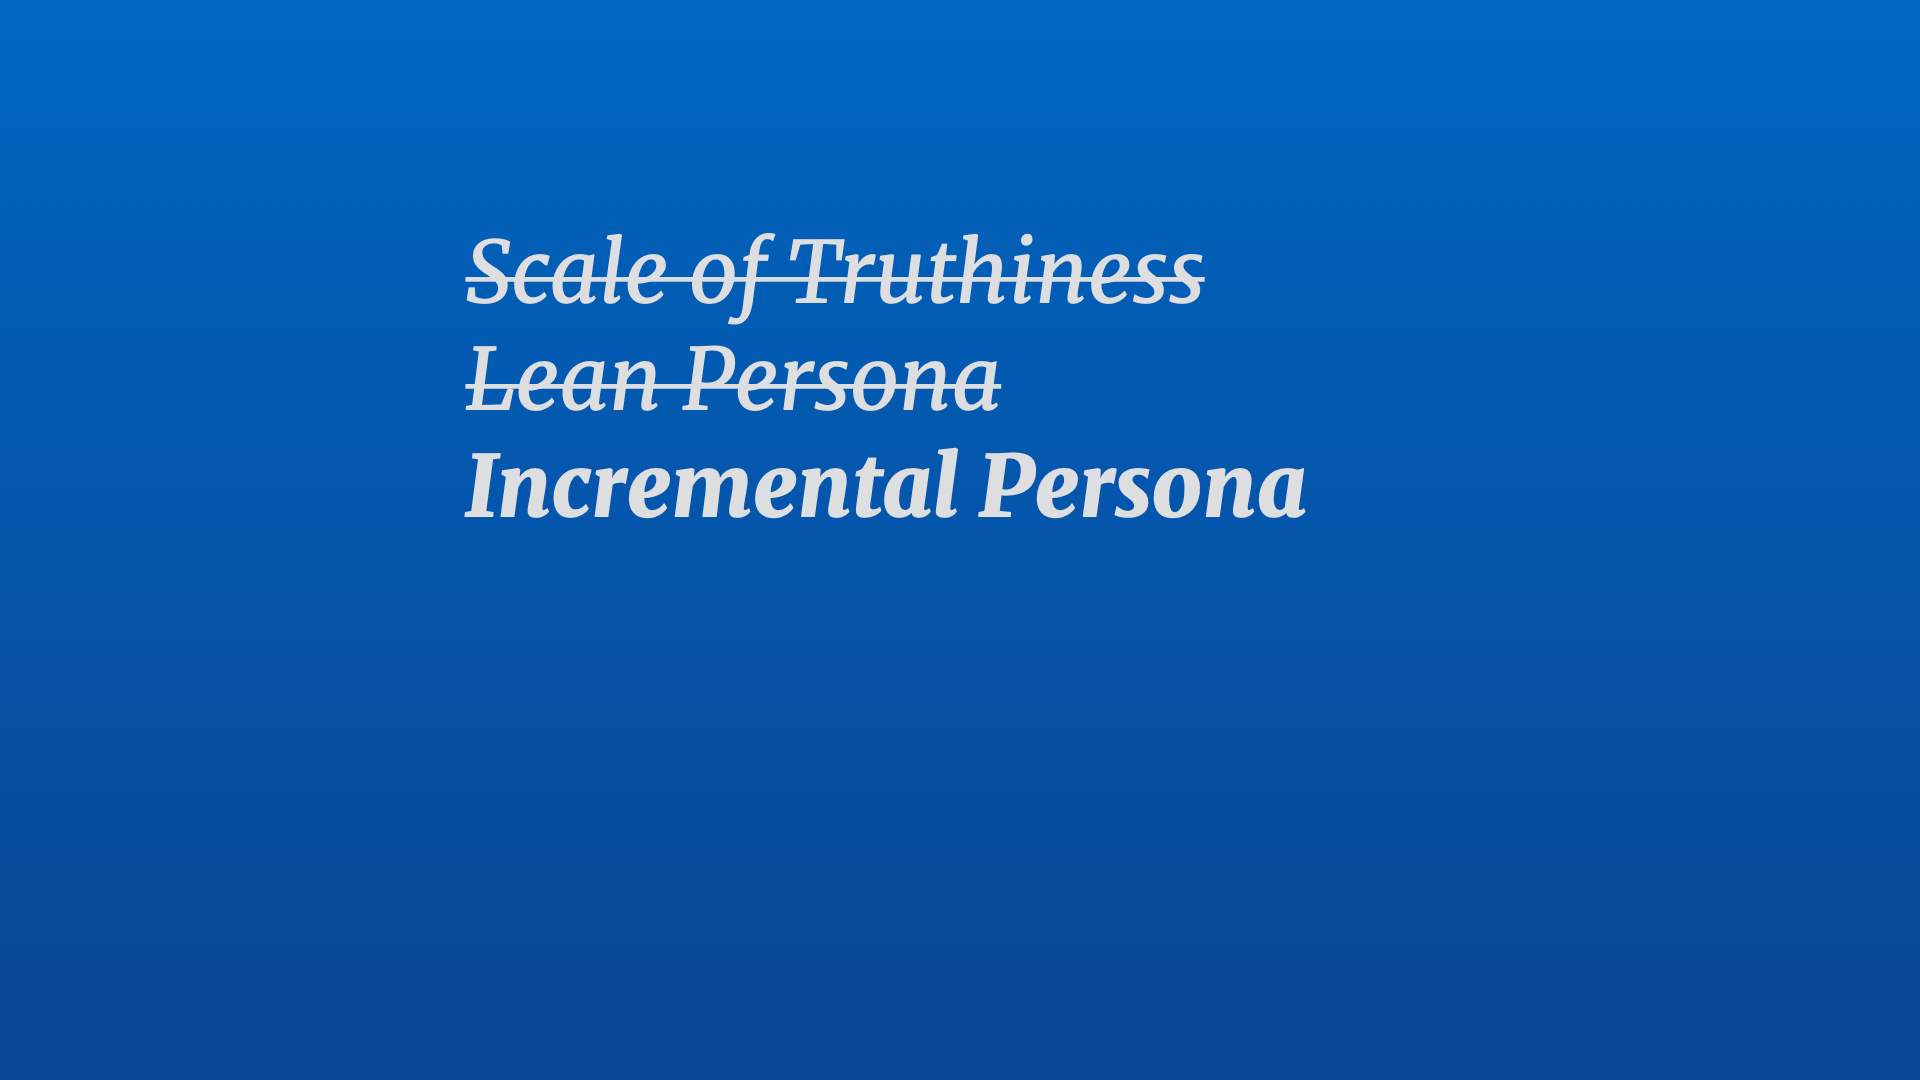 Text title: Incremental Persona (underneath a list of old crossed out titles titles: 'Scale of Truthiness', and 'Lean Persona')